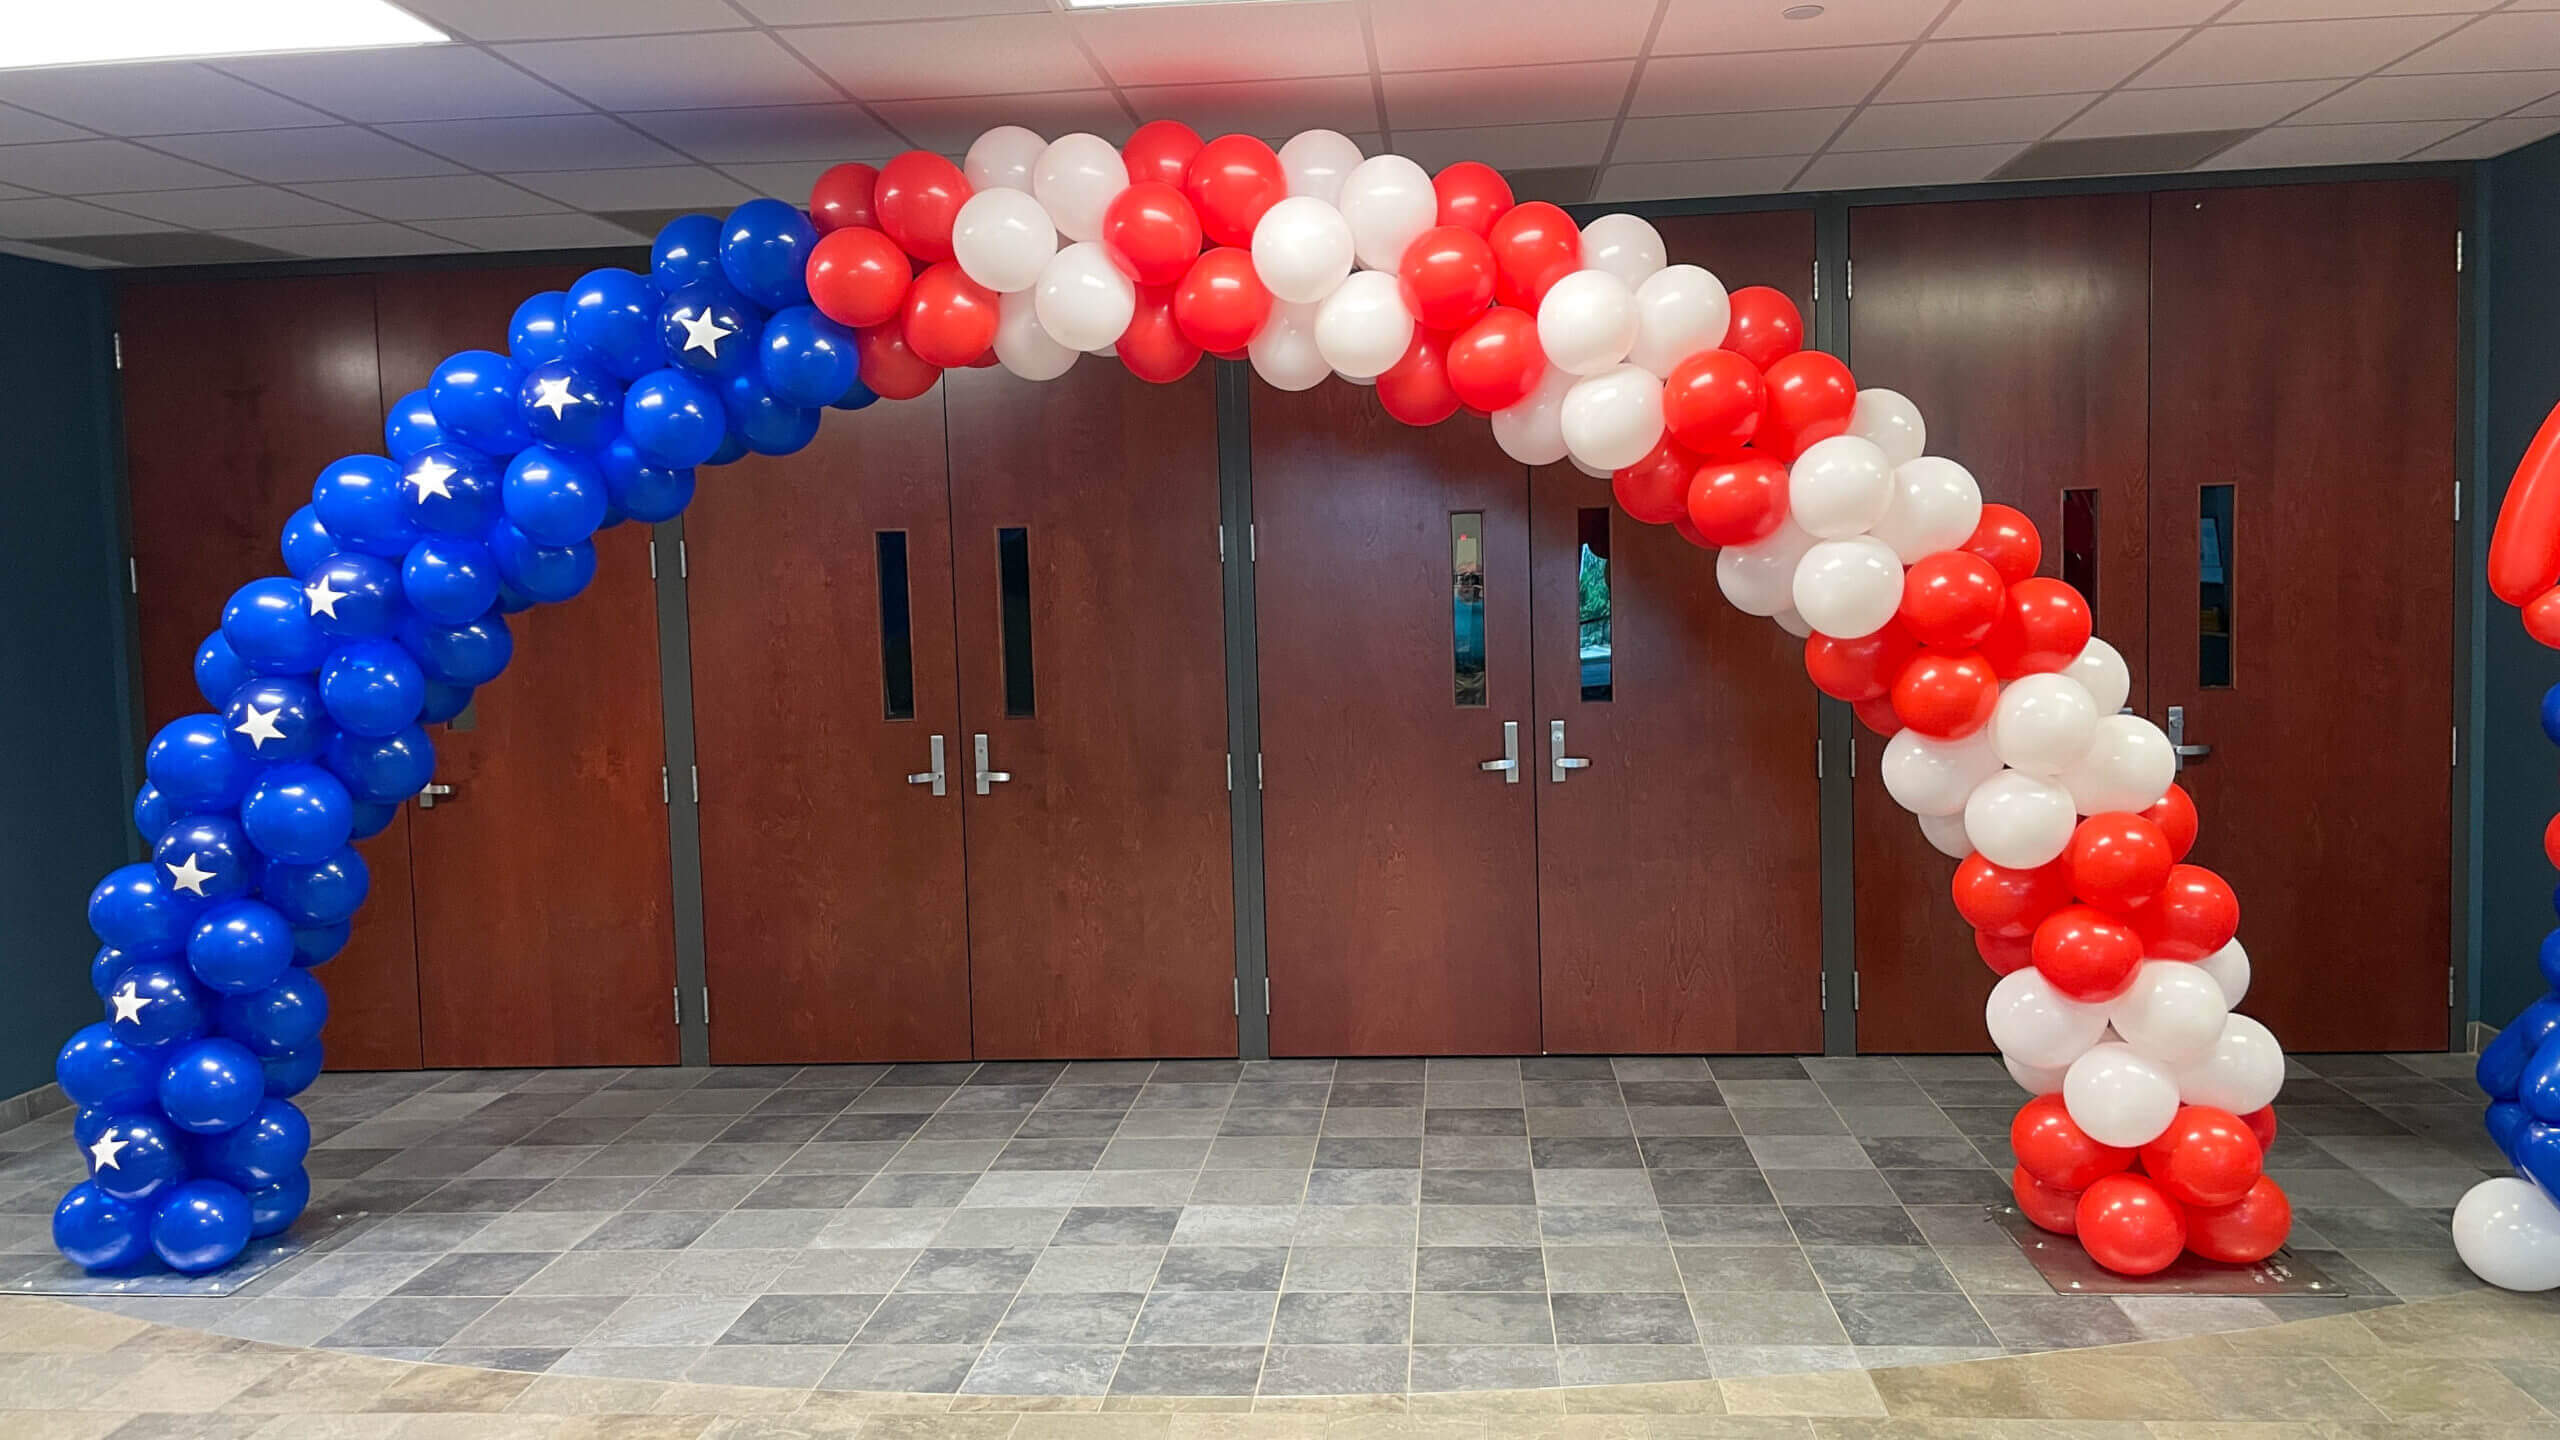 Balloon arch - 4th of July/US Flag colors